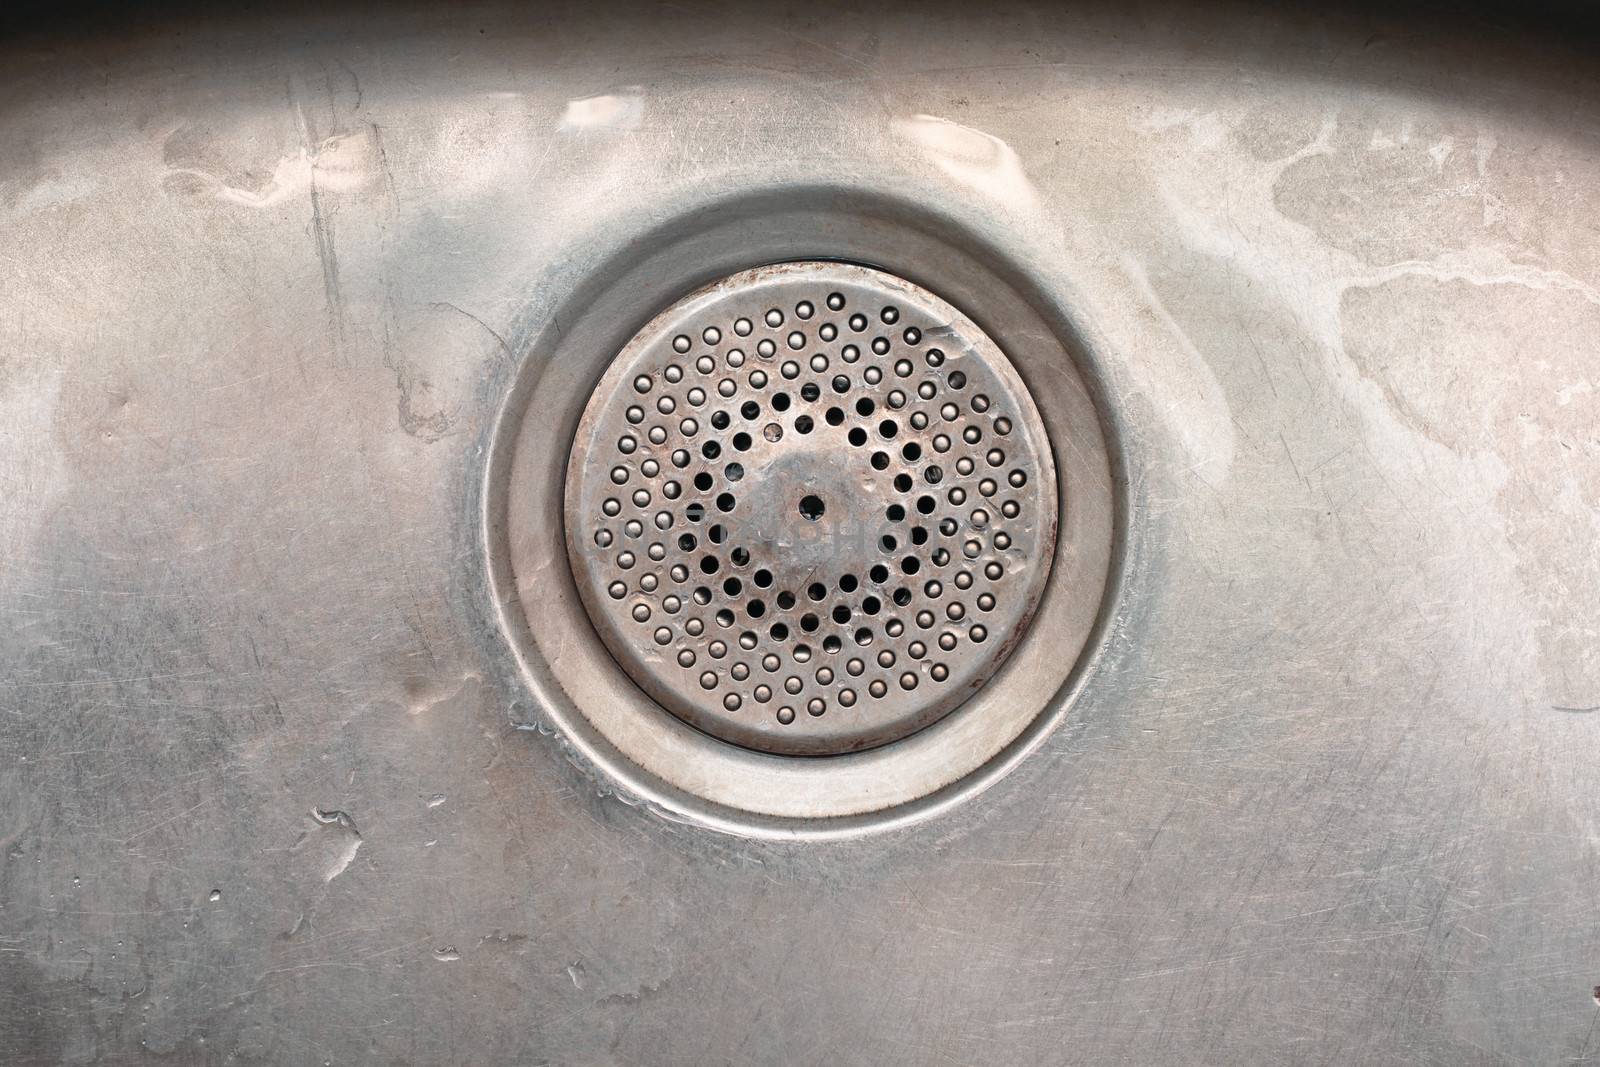 A drainage hole in a metal sink